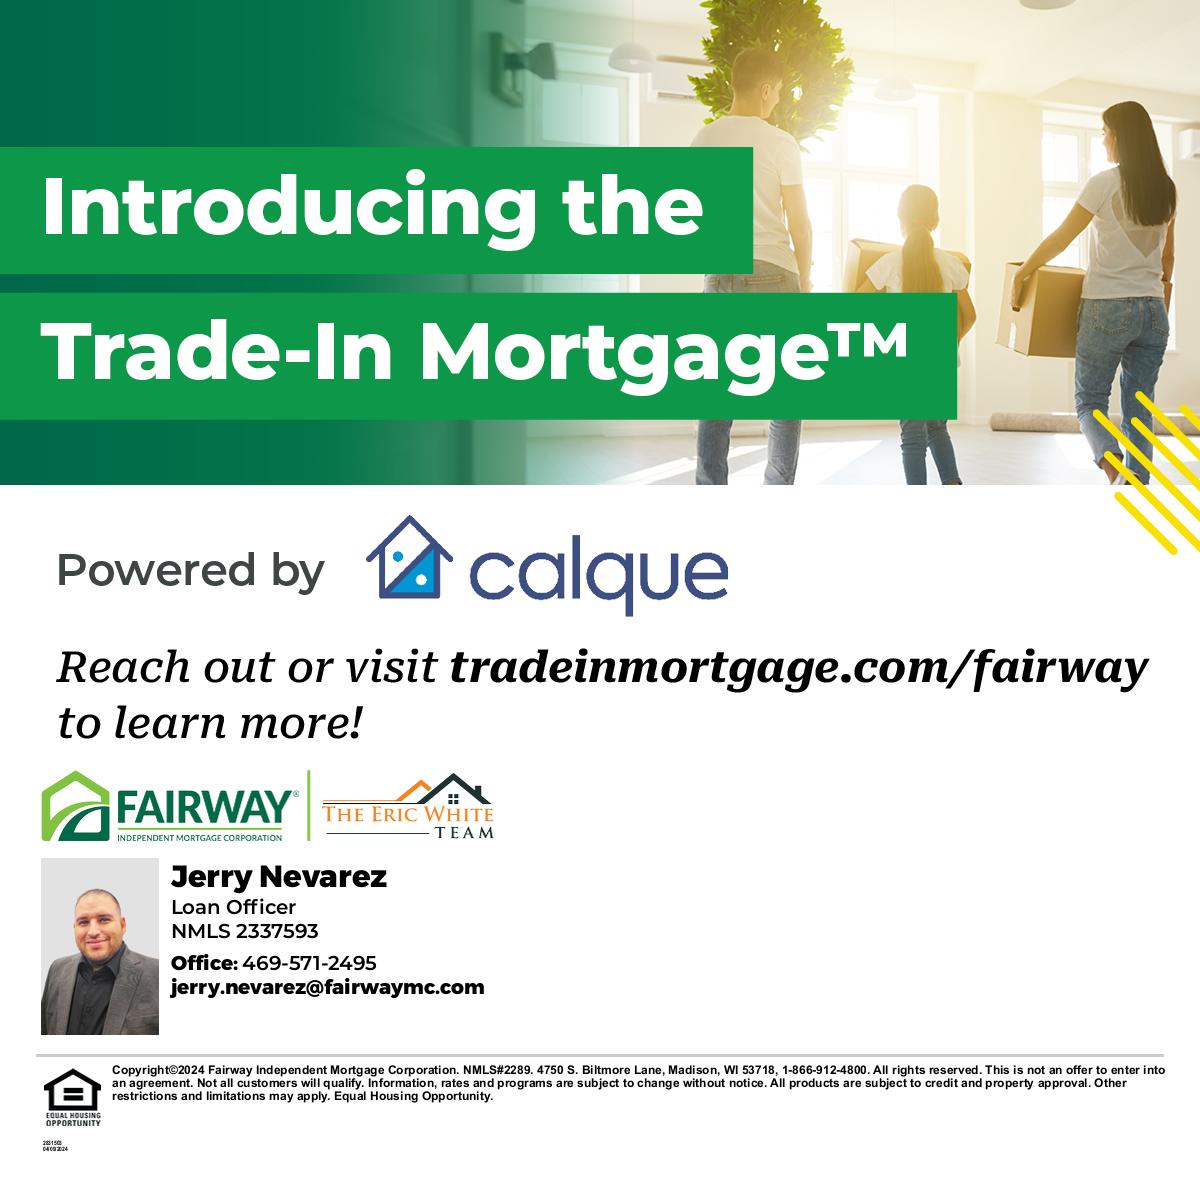 The Trade-In Mortgage™ is a new, innovative home loan that enables buyers to use the equity in their current home to buy and move into their next home before they sell. Reach out today to learn more!  #jerry_themortgageguy #mortgagematters #yourloanexpert #dfwrealestate